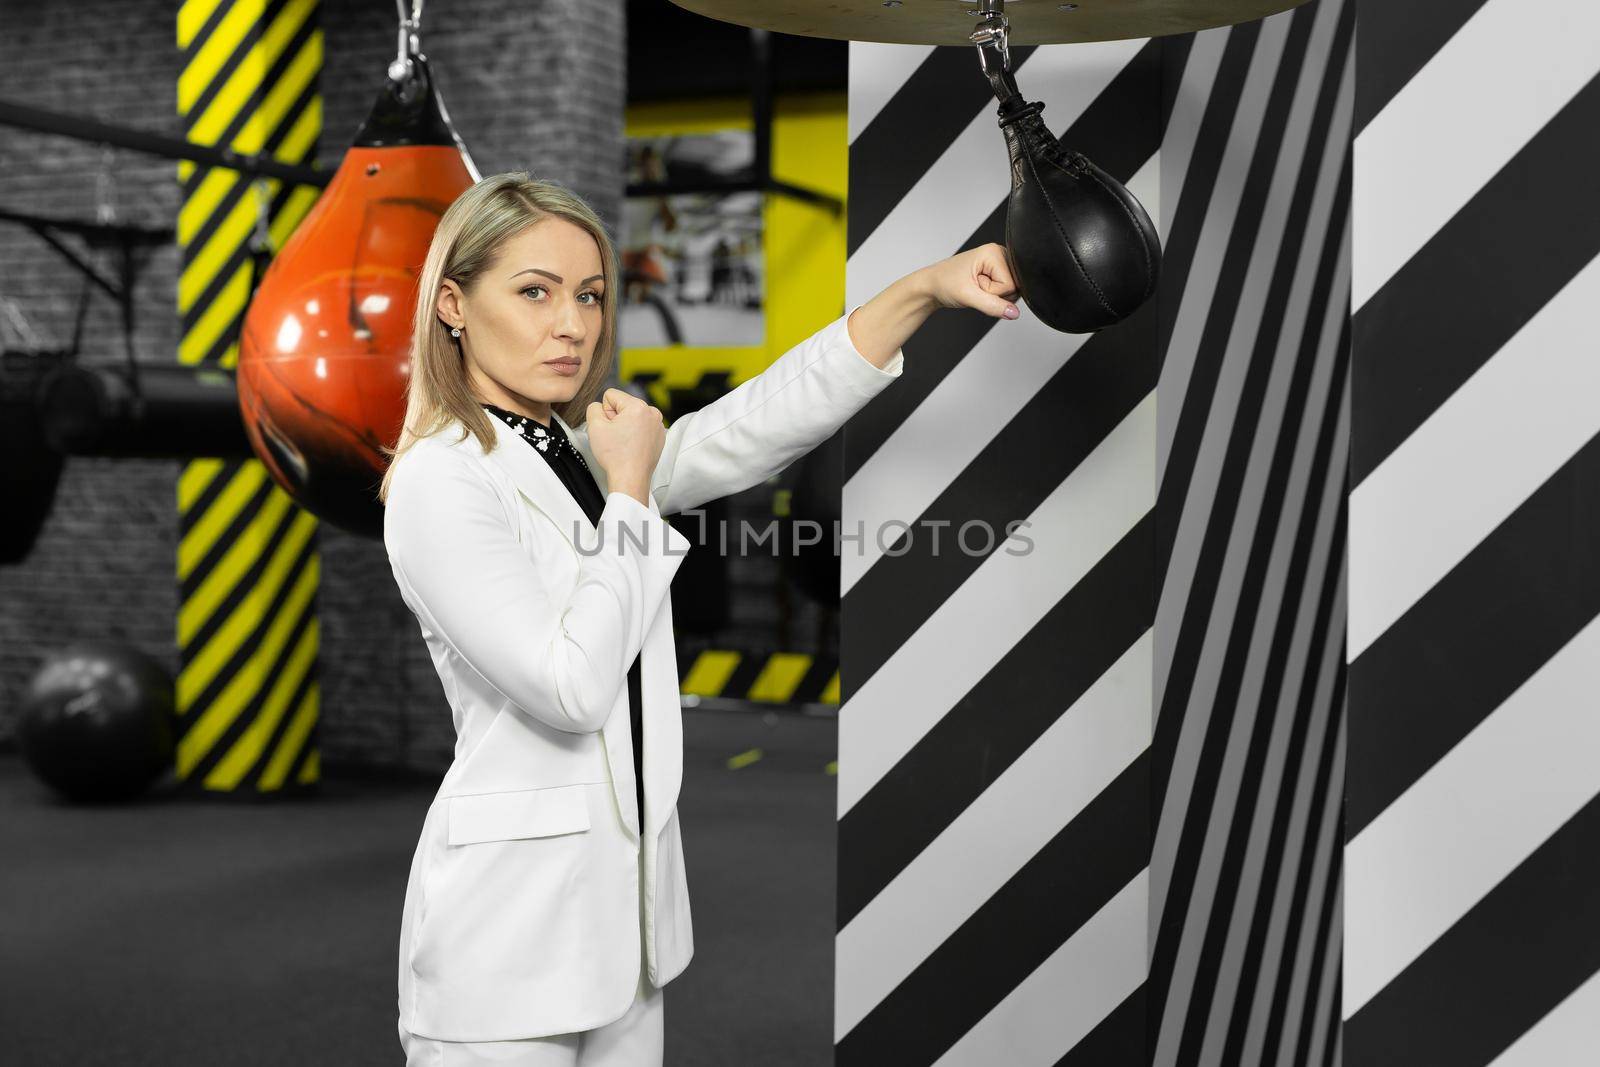 Serious, focused businesswoman hits a punching bag in the gym. The concept of anger management.